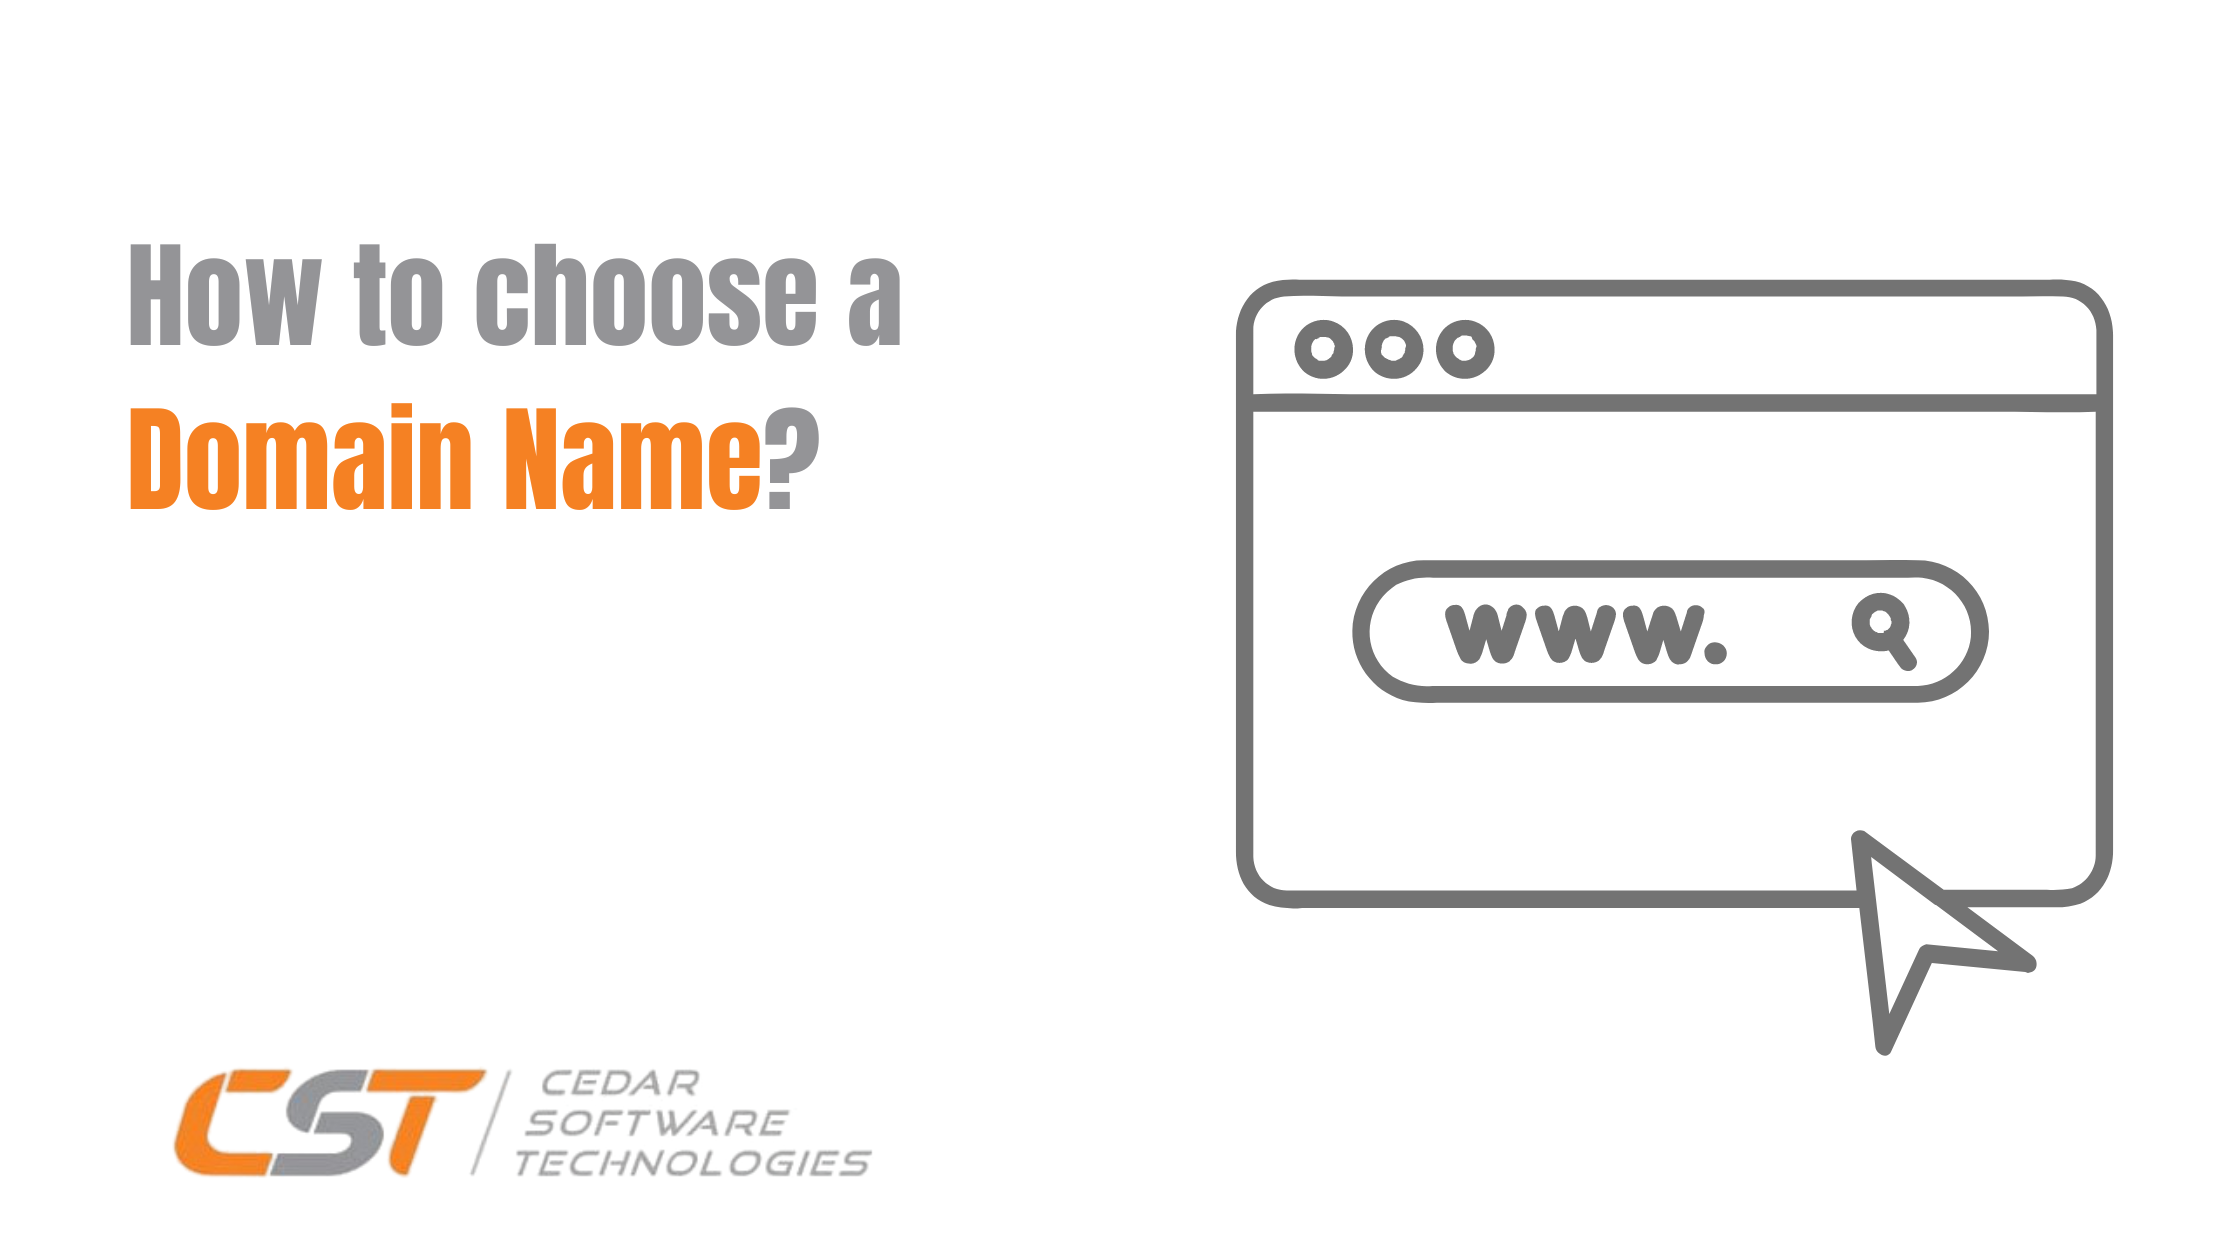 How to choose a Domain Name?